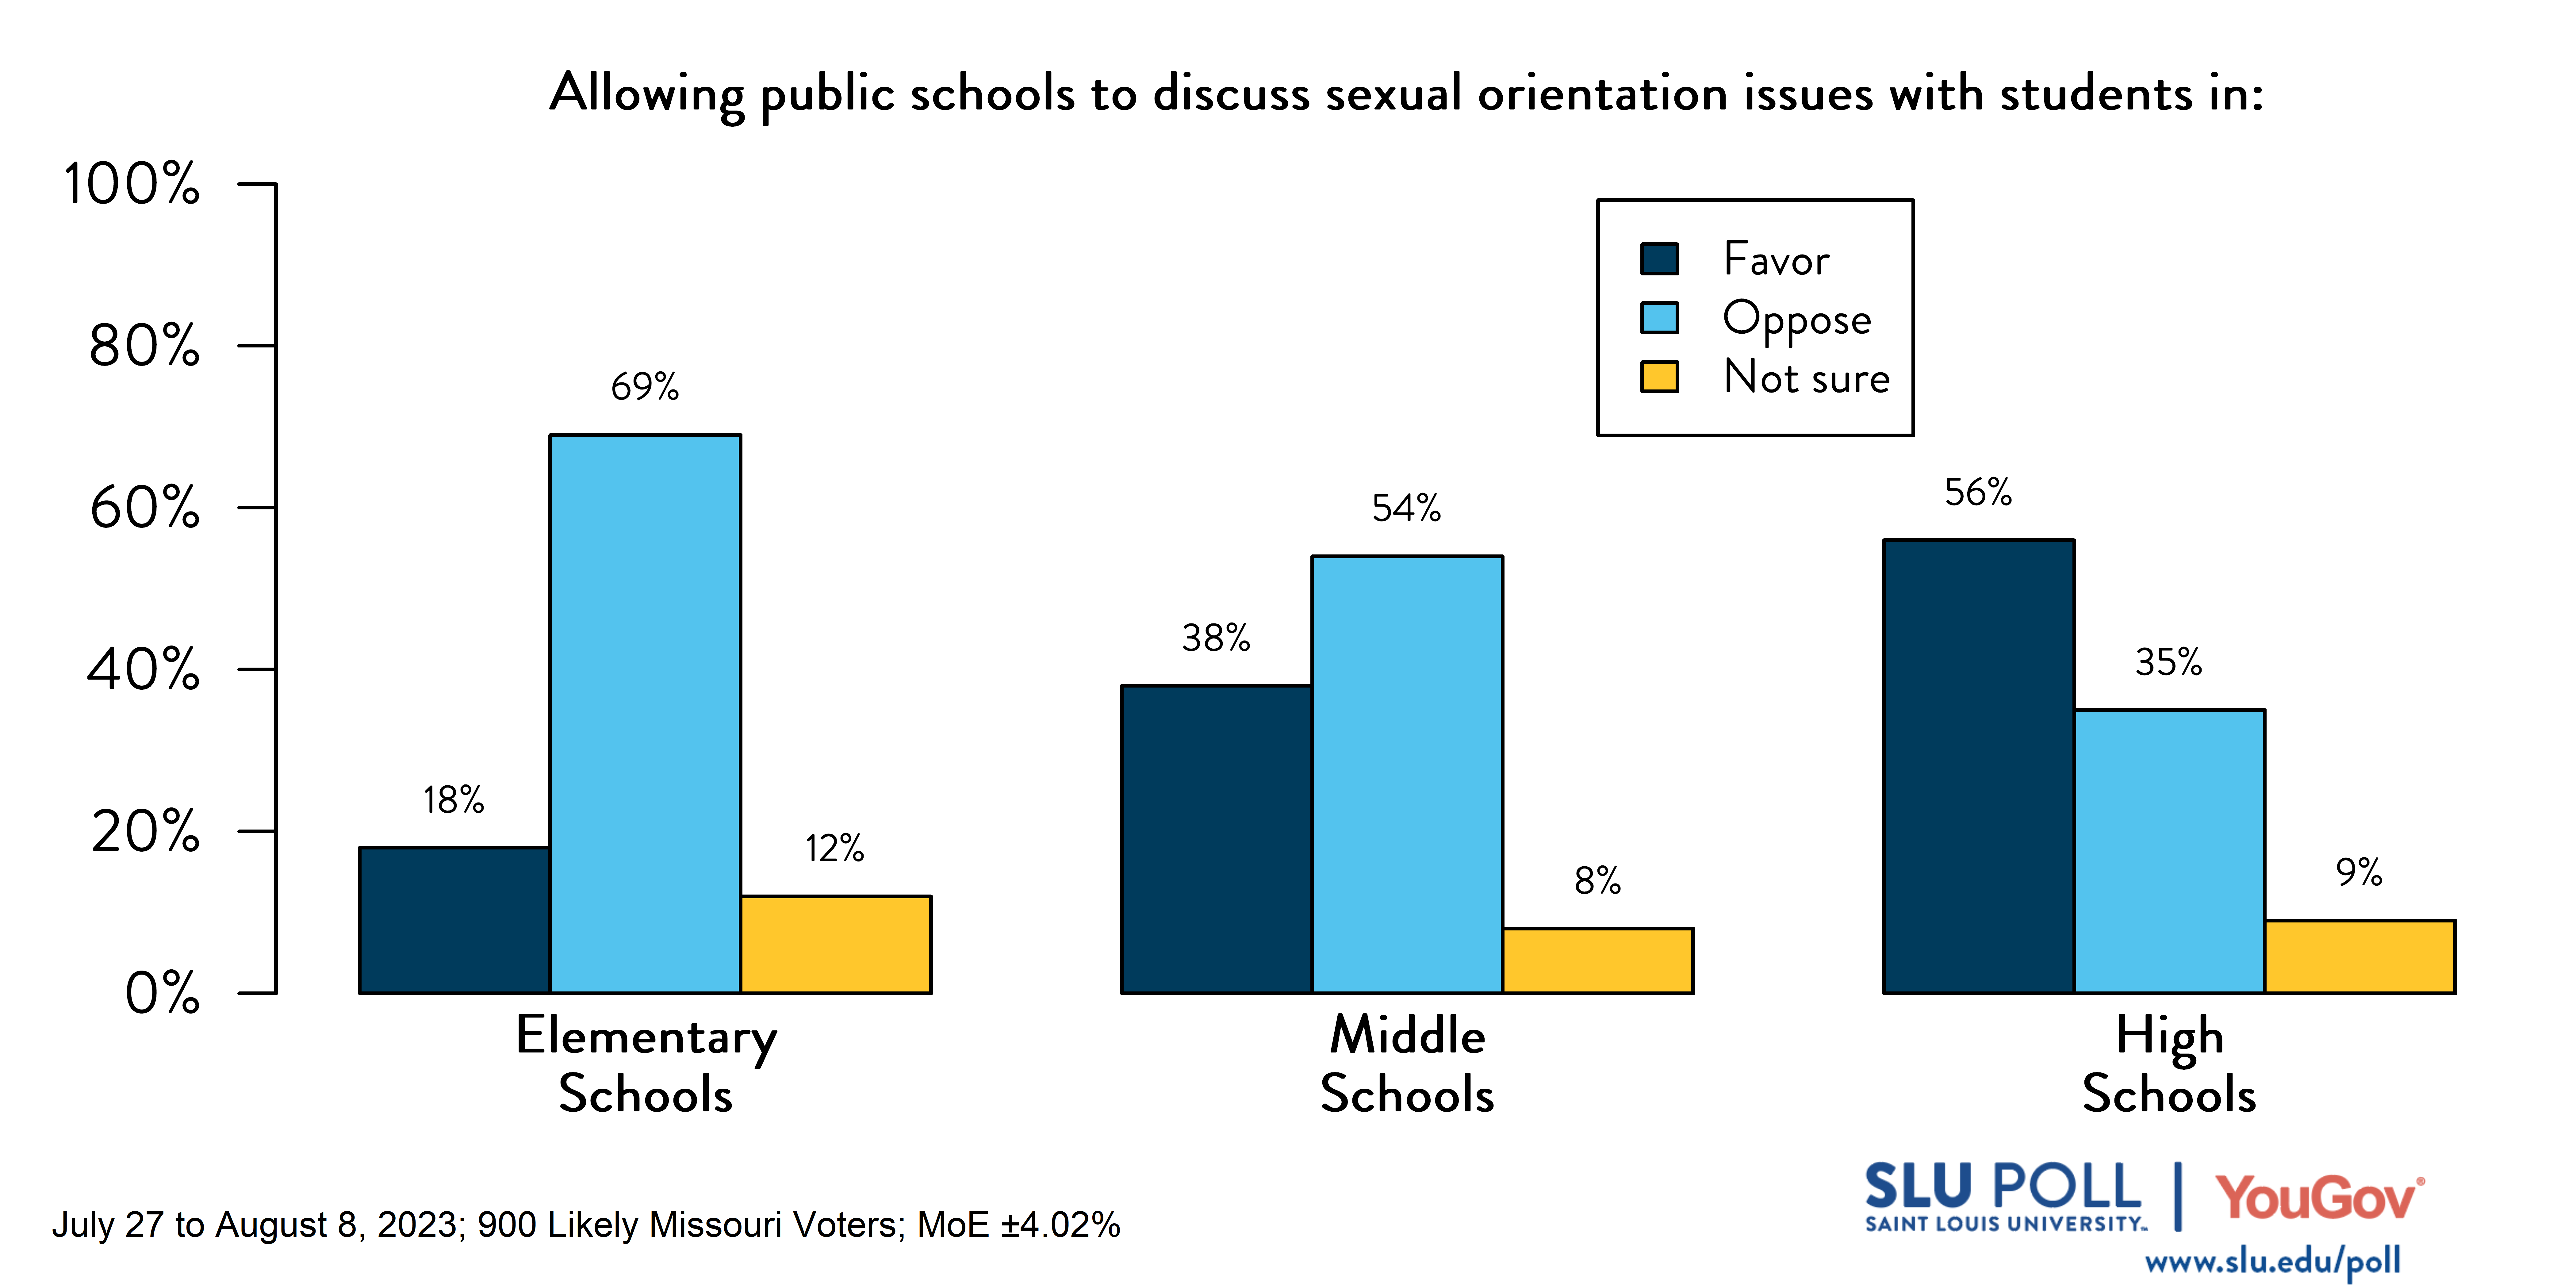 Likely voters’ responses to ‘Do you favor or oppose public schools being allowed to: discuss sexual orientation issues with students in elementary schools?’: 18% Favor, 69% Oppose, and 12% Not Sure. Likely voters’ responses to ‘Do you favor or oppose public schools being allowed to: discuss sexual orientation issues with students in middle schools?’: 38% Favor, 54% Oppose, and 8% Not Sure. Likely voters’ responses to ‘Do you favor or oppose public schools being allowed to: discuss sexual orientation issues with students in high schools?’: 56% Favor, 35% Oppose, and 9% Not Sure.